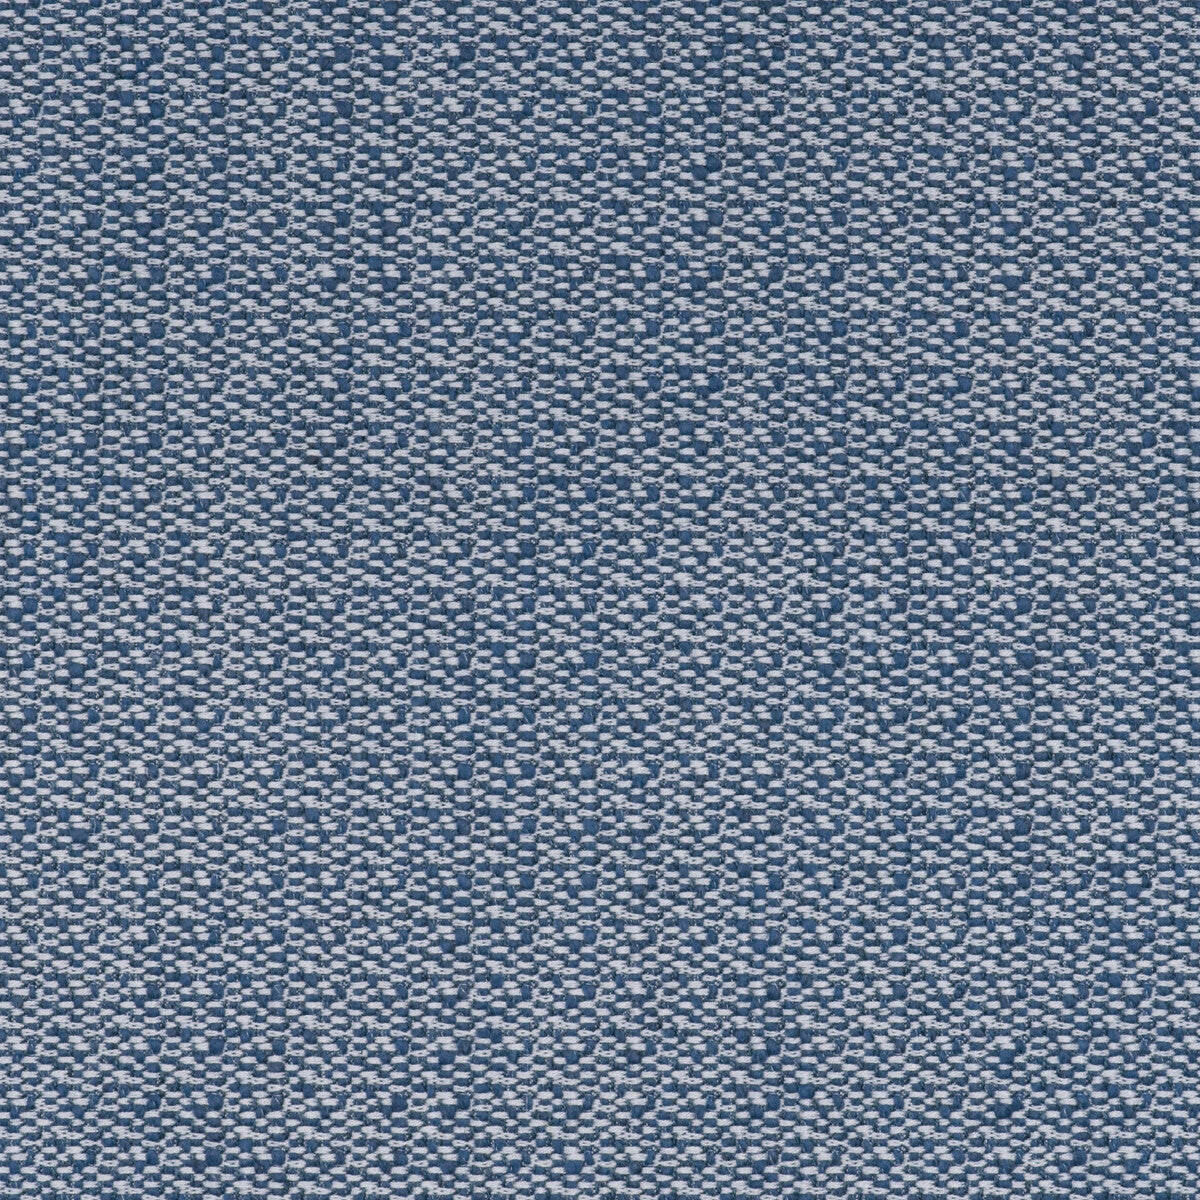 Ravello fabric in denim color - pattern AM100431.5.0 - by Kravet Couture in the Andrew Martin Amalfi collection